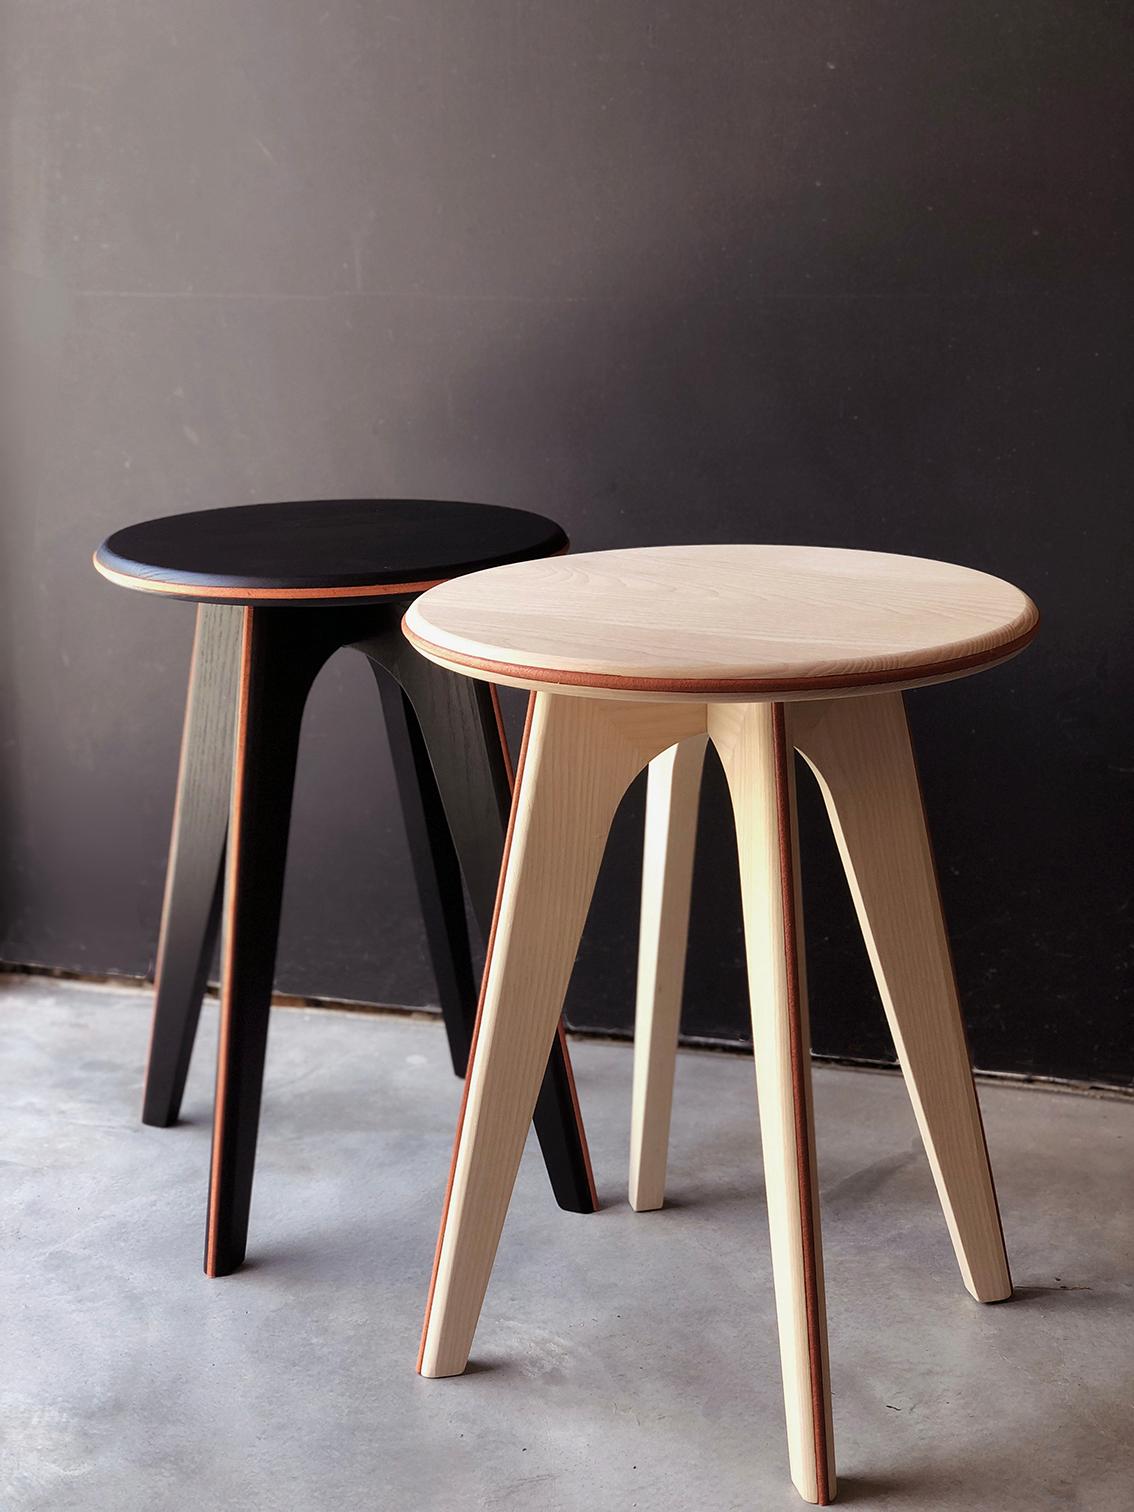 Set of 2 Ash and Orange Leather ASSY Stools by Mademoiselle Jo
Dimensions: Ø 35 x H 43 cm (each).
Materials: Black stained/bleached ash and orange leather.

Available in two wood colors and several designs.  Please contact us.

At the border between